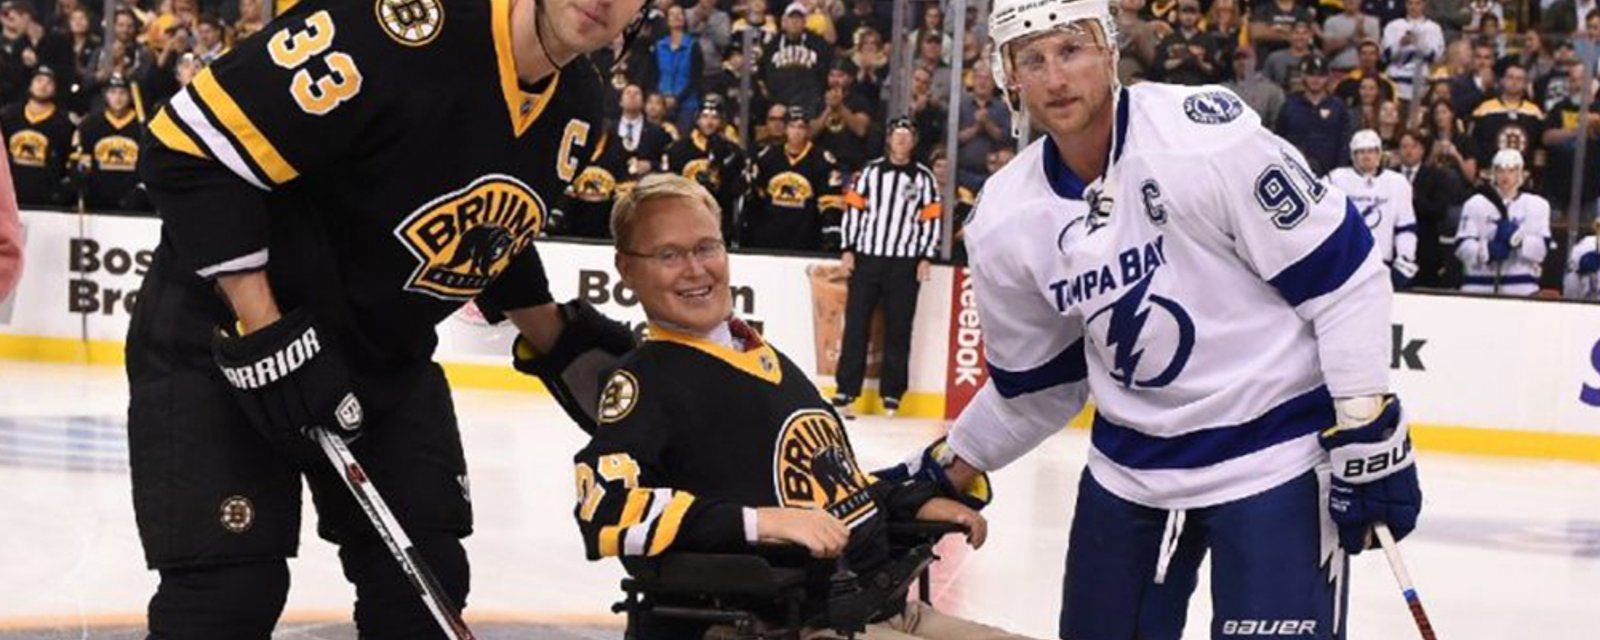 Travis Roy, hockey player who was paralyzed on the ice, passes away at 45